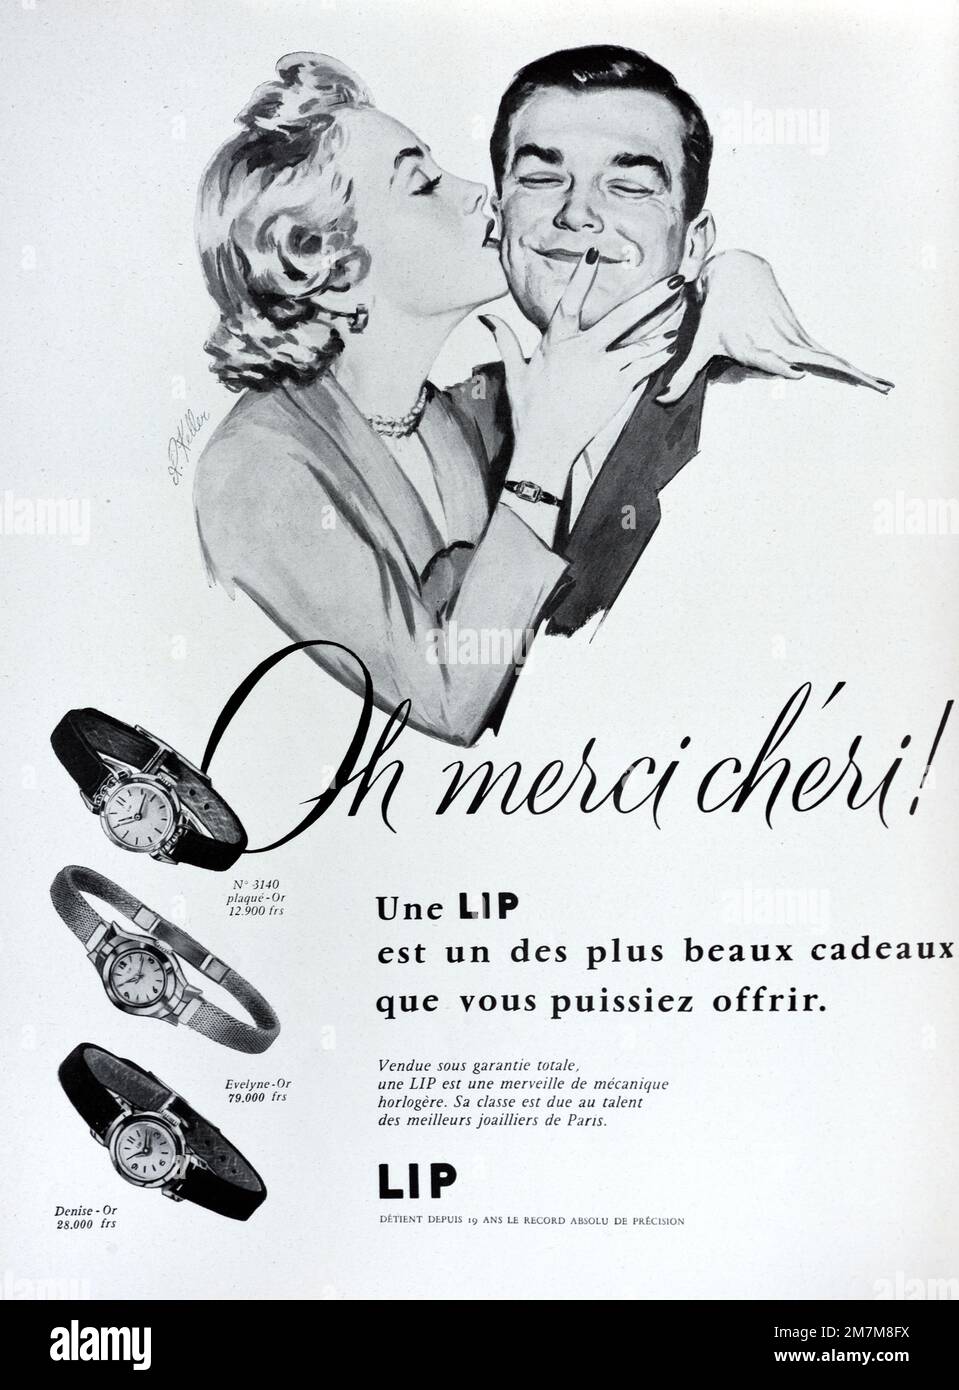 Vintage or Old Advert, Advertisement, Publicity or Illustration for Female Lip Watch or Watches Advert 1956. Illustrated with Image or 1950s Young Couple with Wife thanking Husband for her Present. Stock Photo